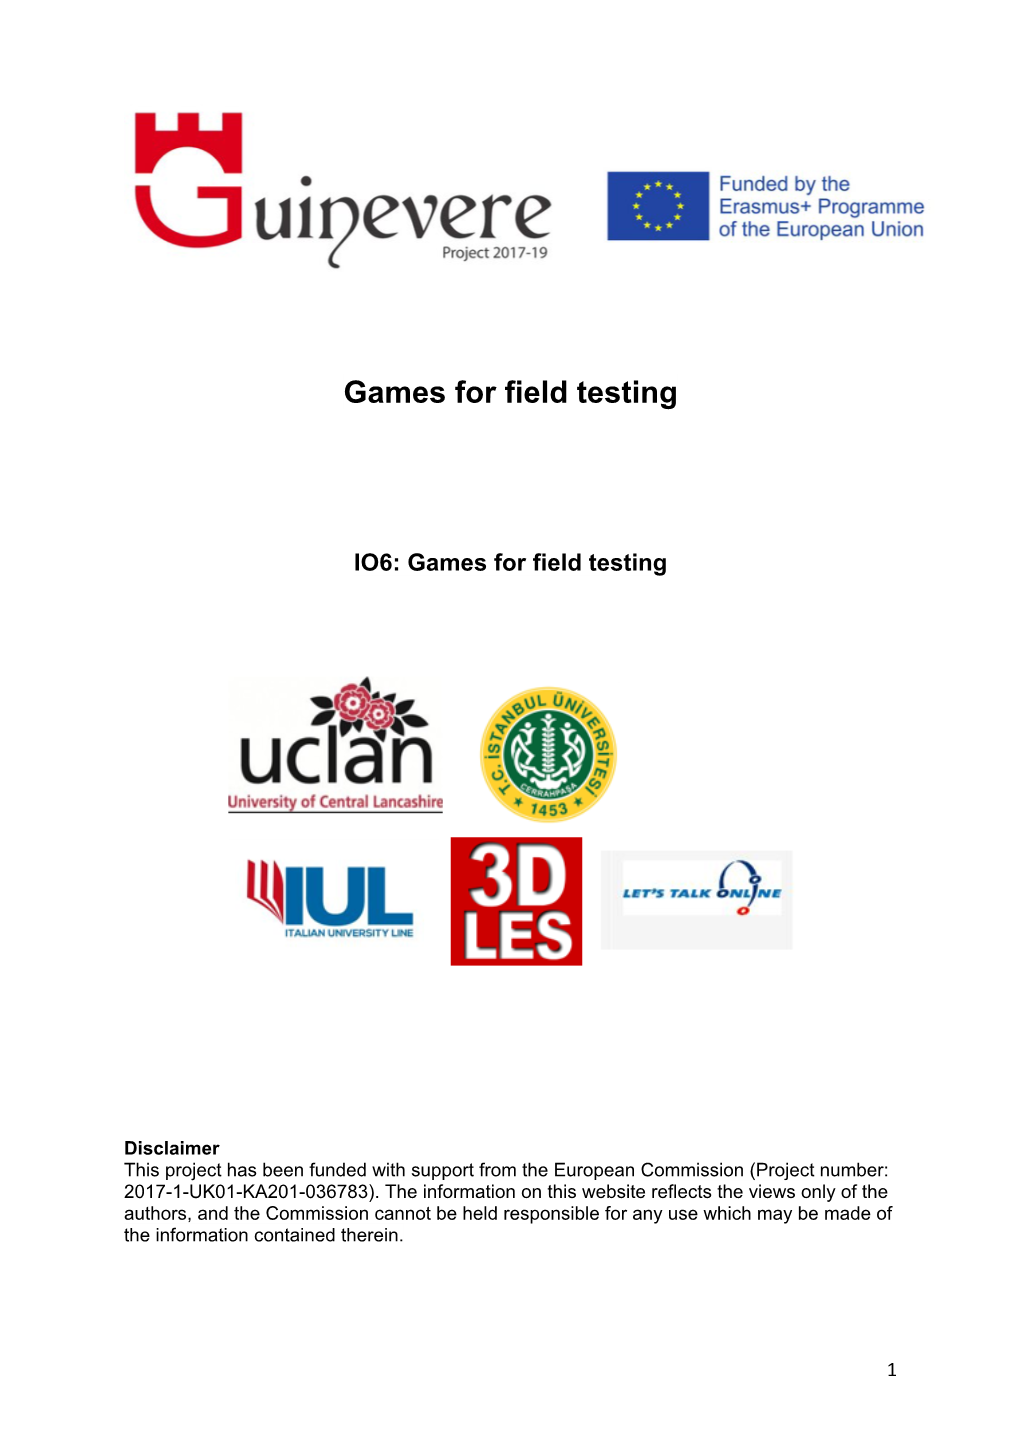 Games for Field Testing